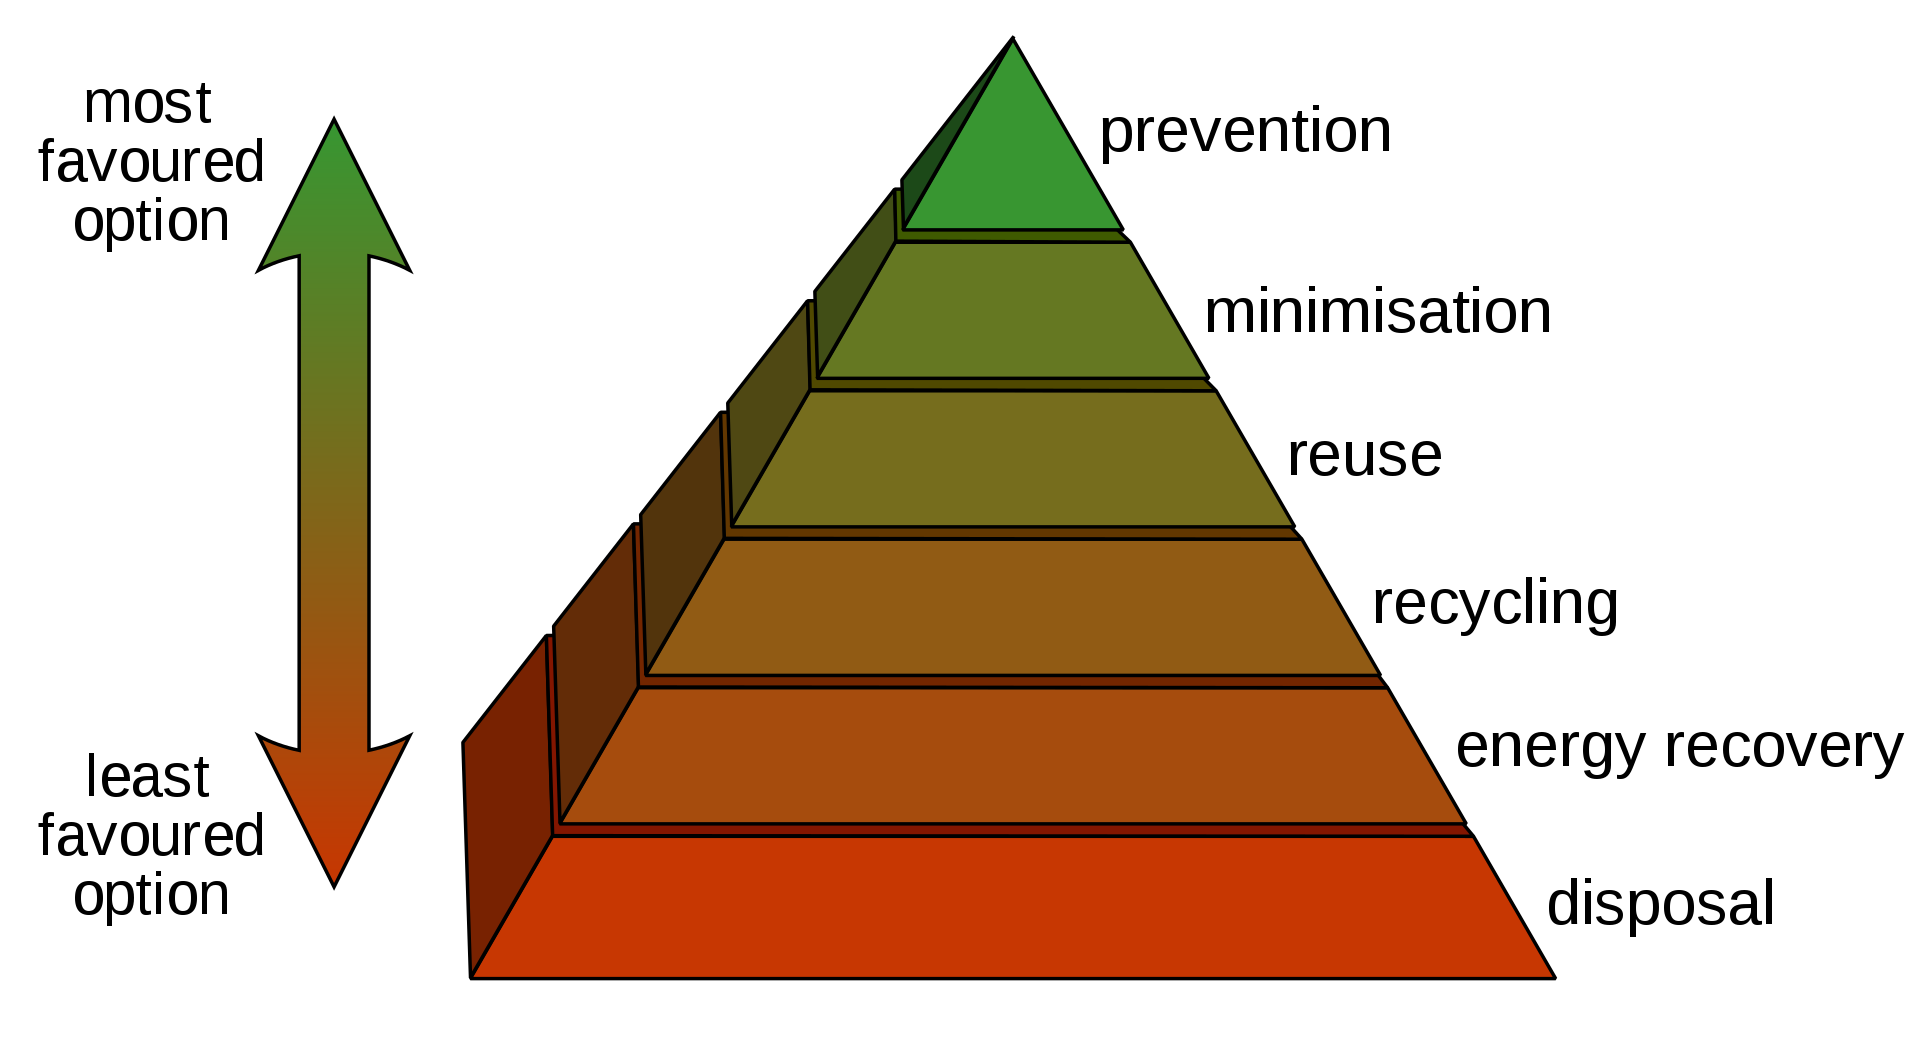 In the reduce-reuse-recycle pyramid, reduction comes first